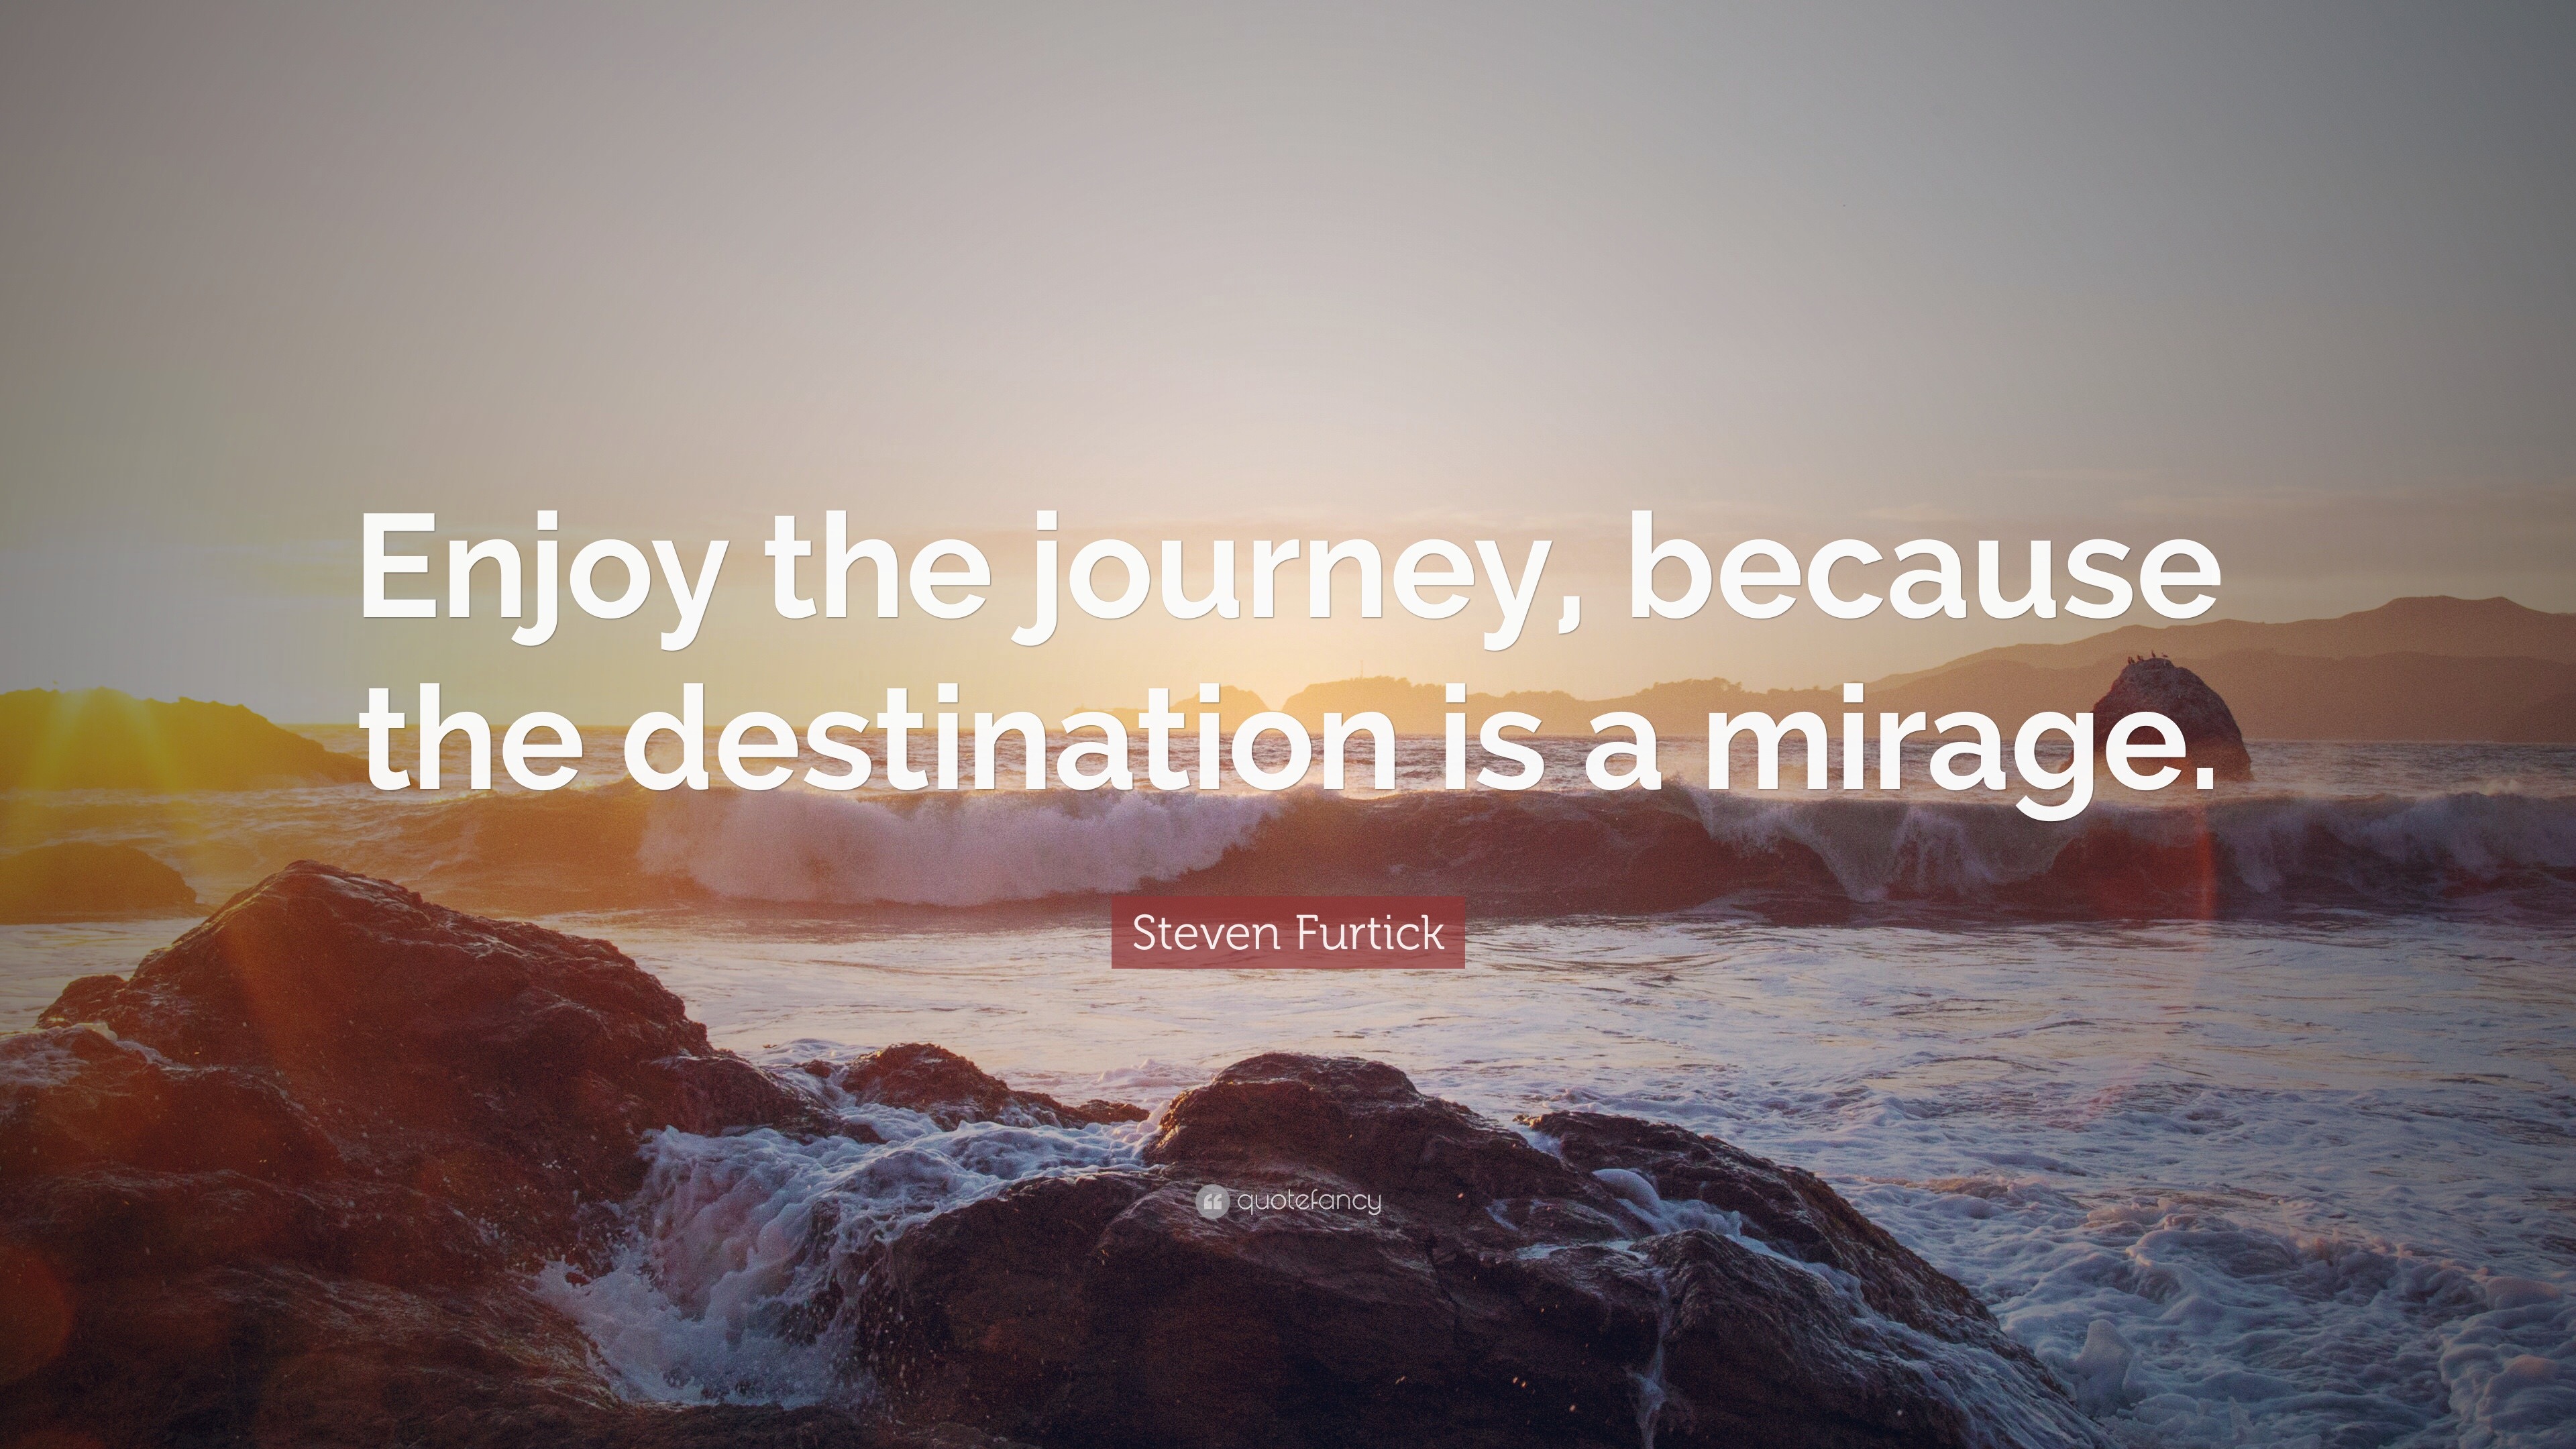 STOP focusing on the destination and START enjoying the journey.